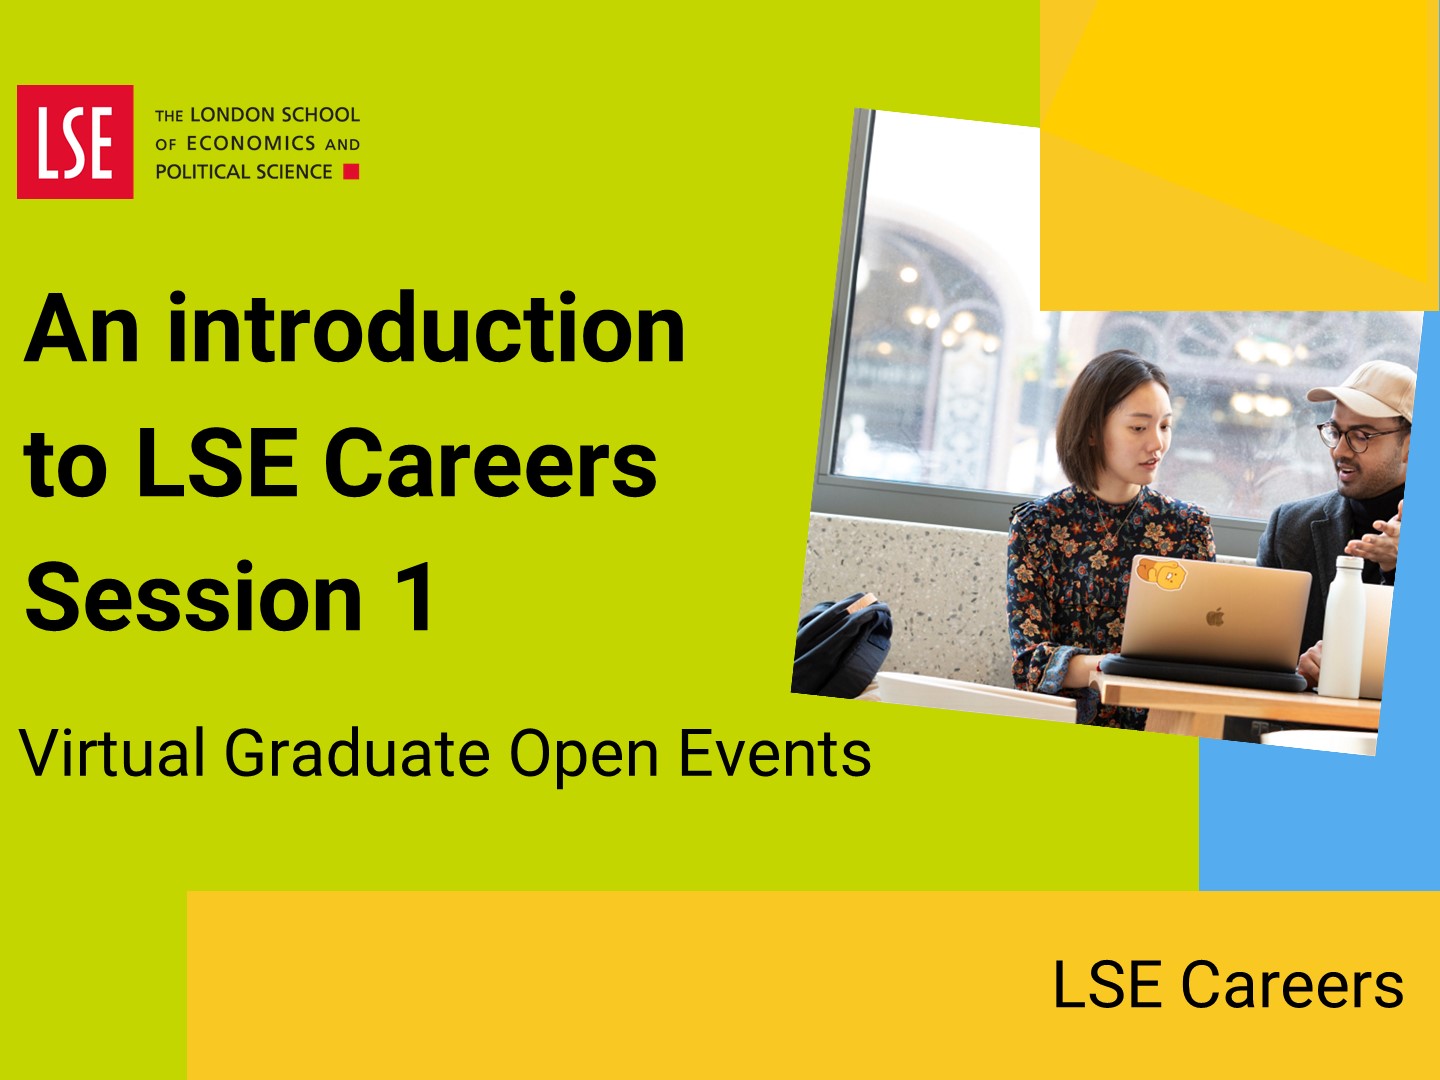 An introduction to LSE Careers (session 1)